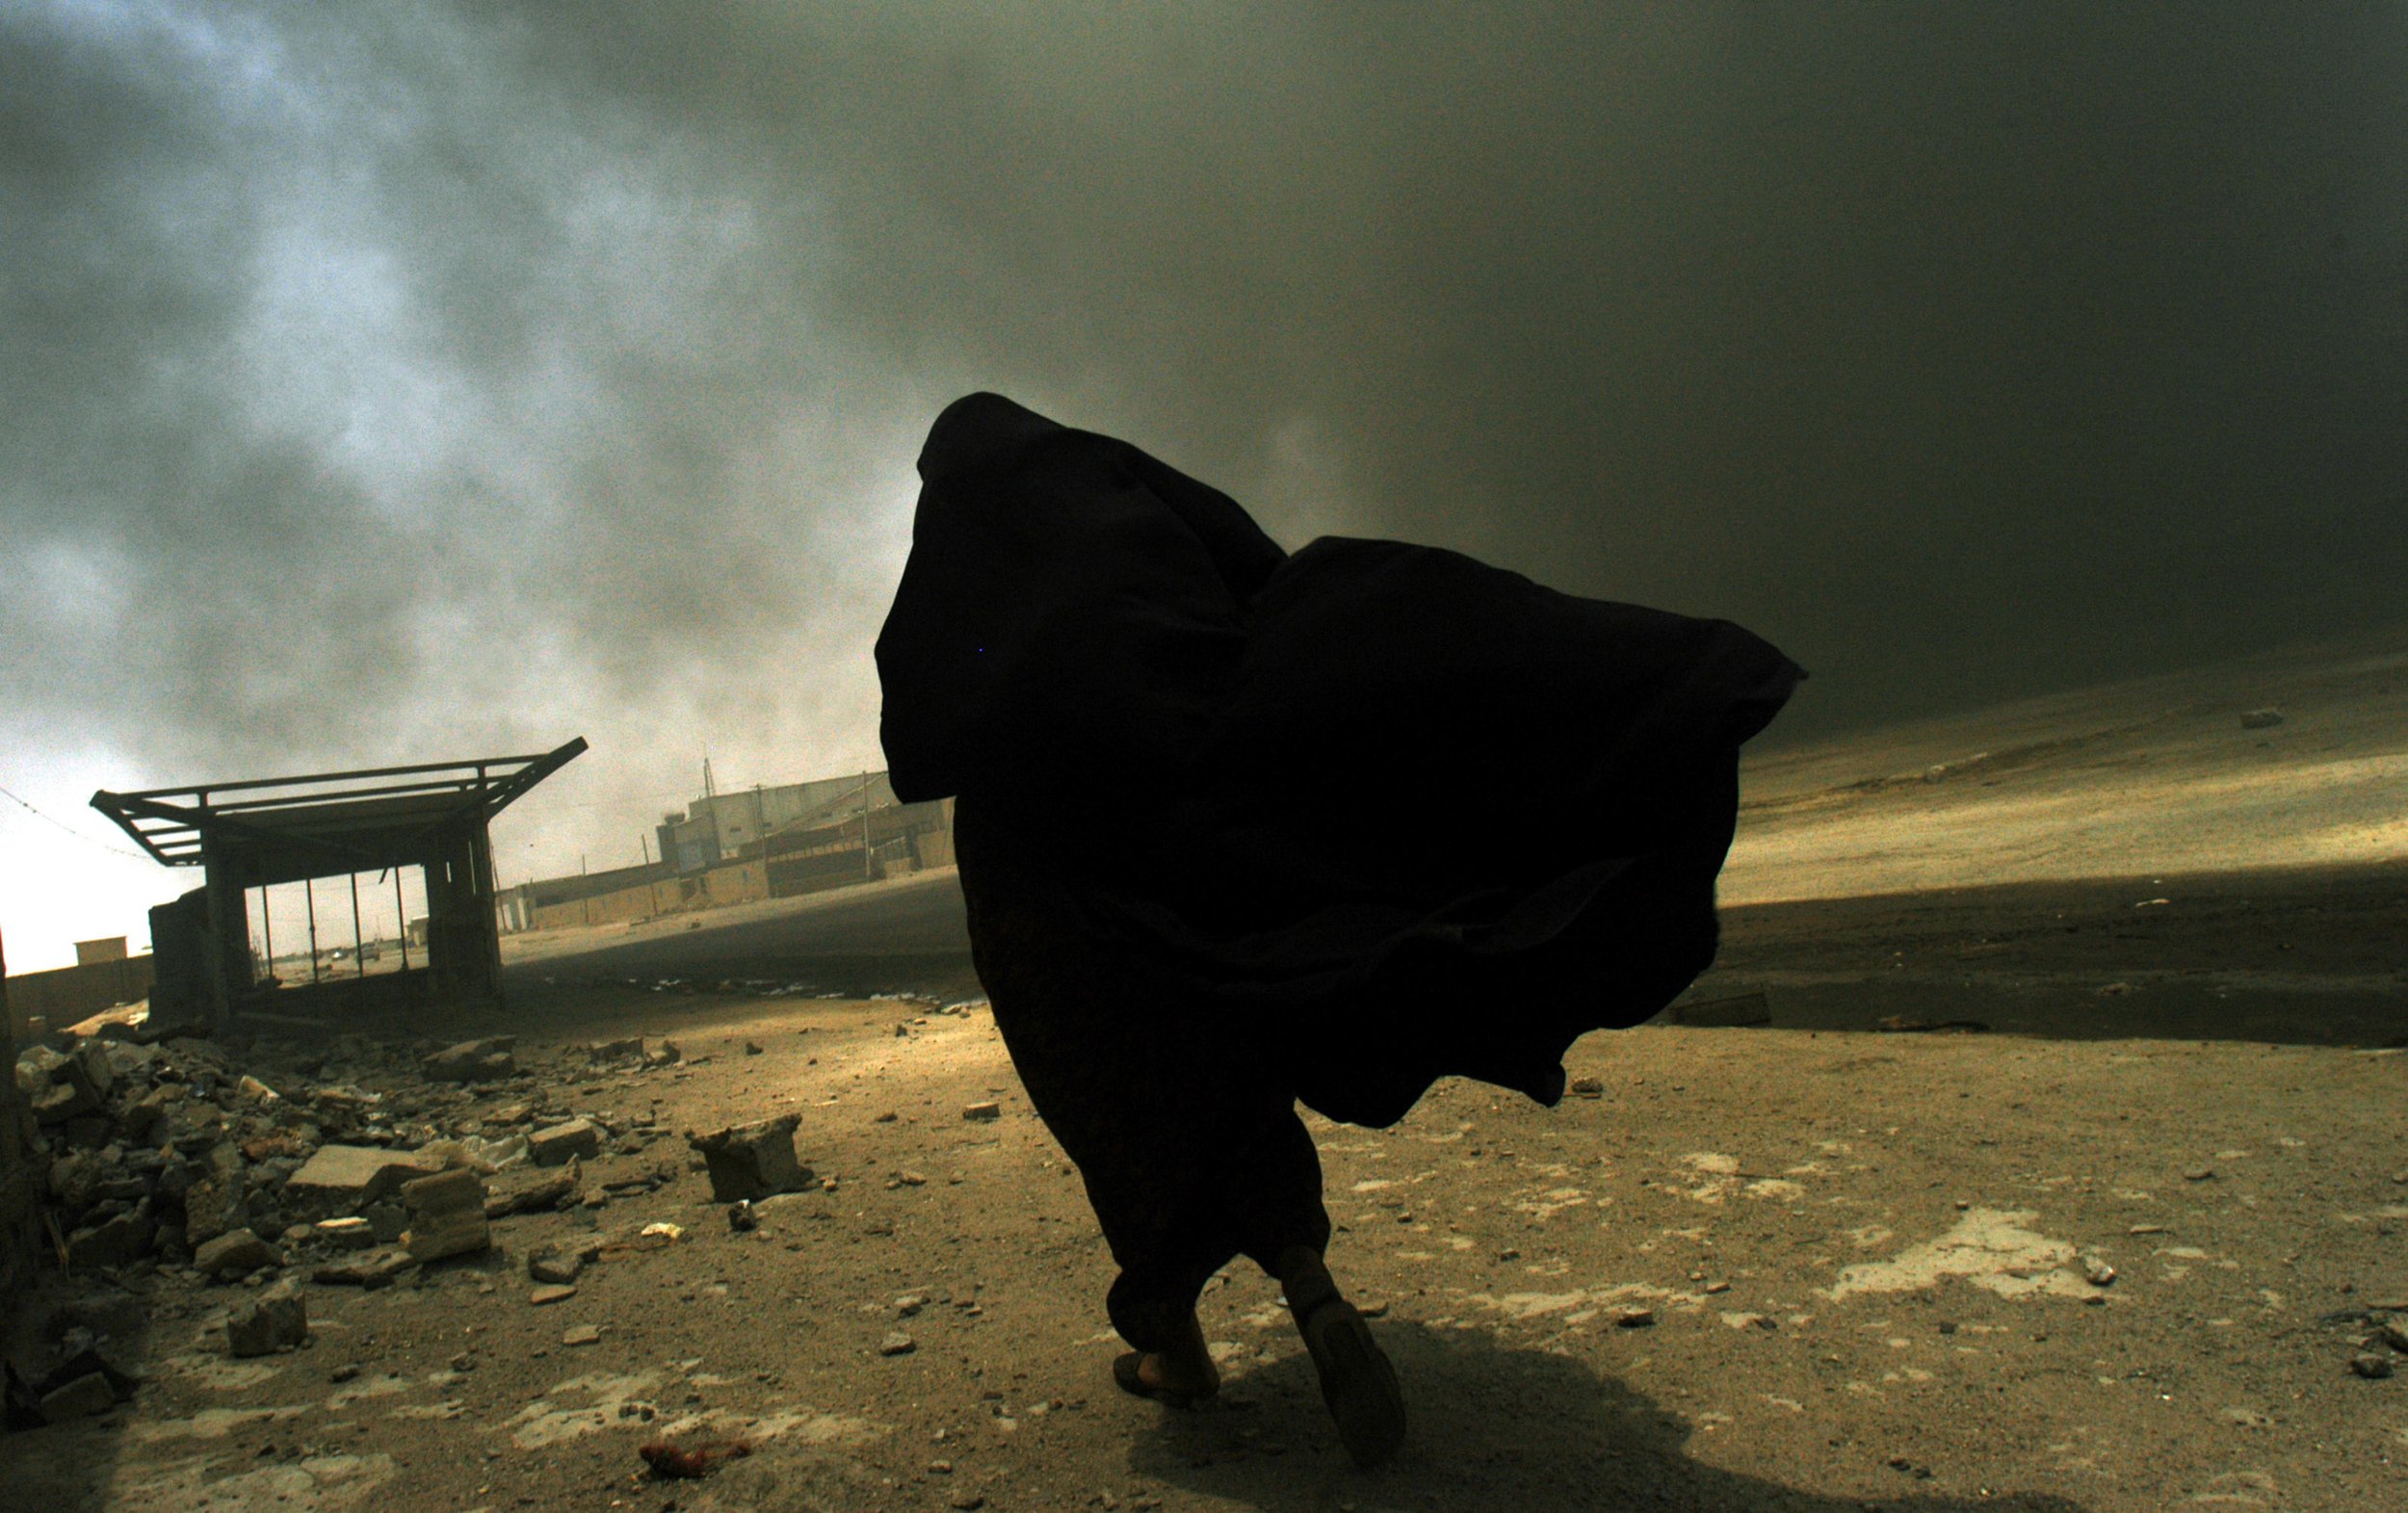  An Iraqi woman walks through a plume of smoke rising from a massive fire at a liquid gas factory as she searches for her husband in the vicinity of the fire in Basra, Iraq, May 26, 2003.  The fire was allegedly started by looters picking through the